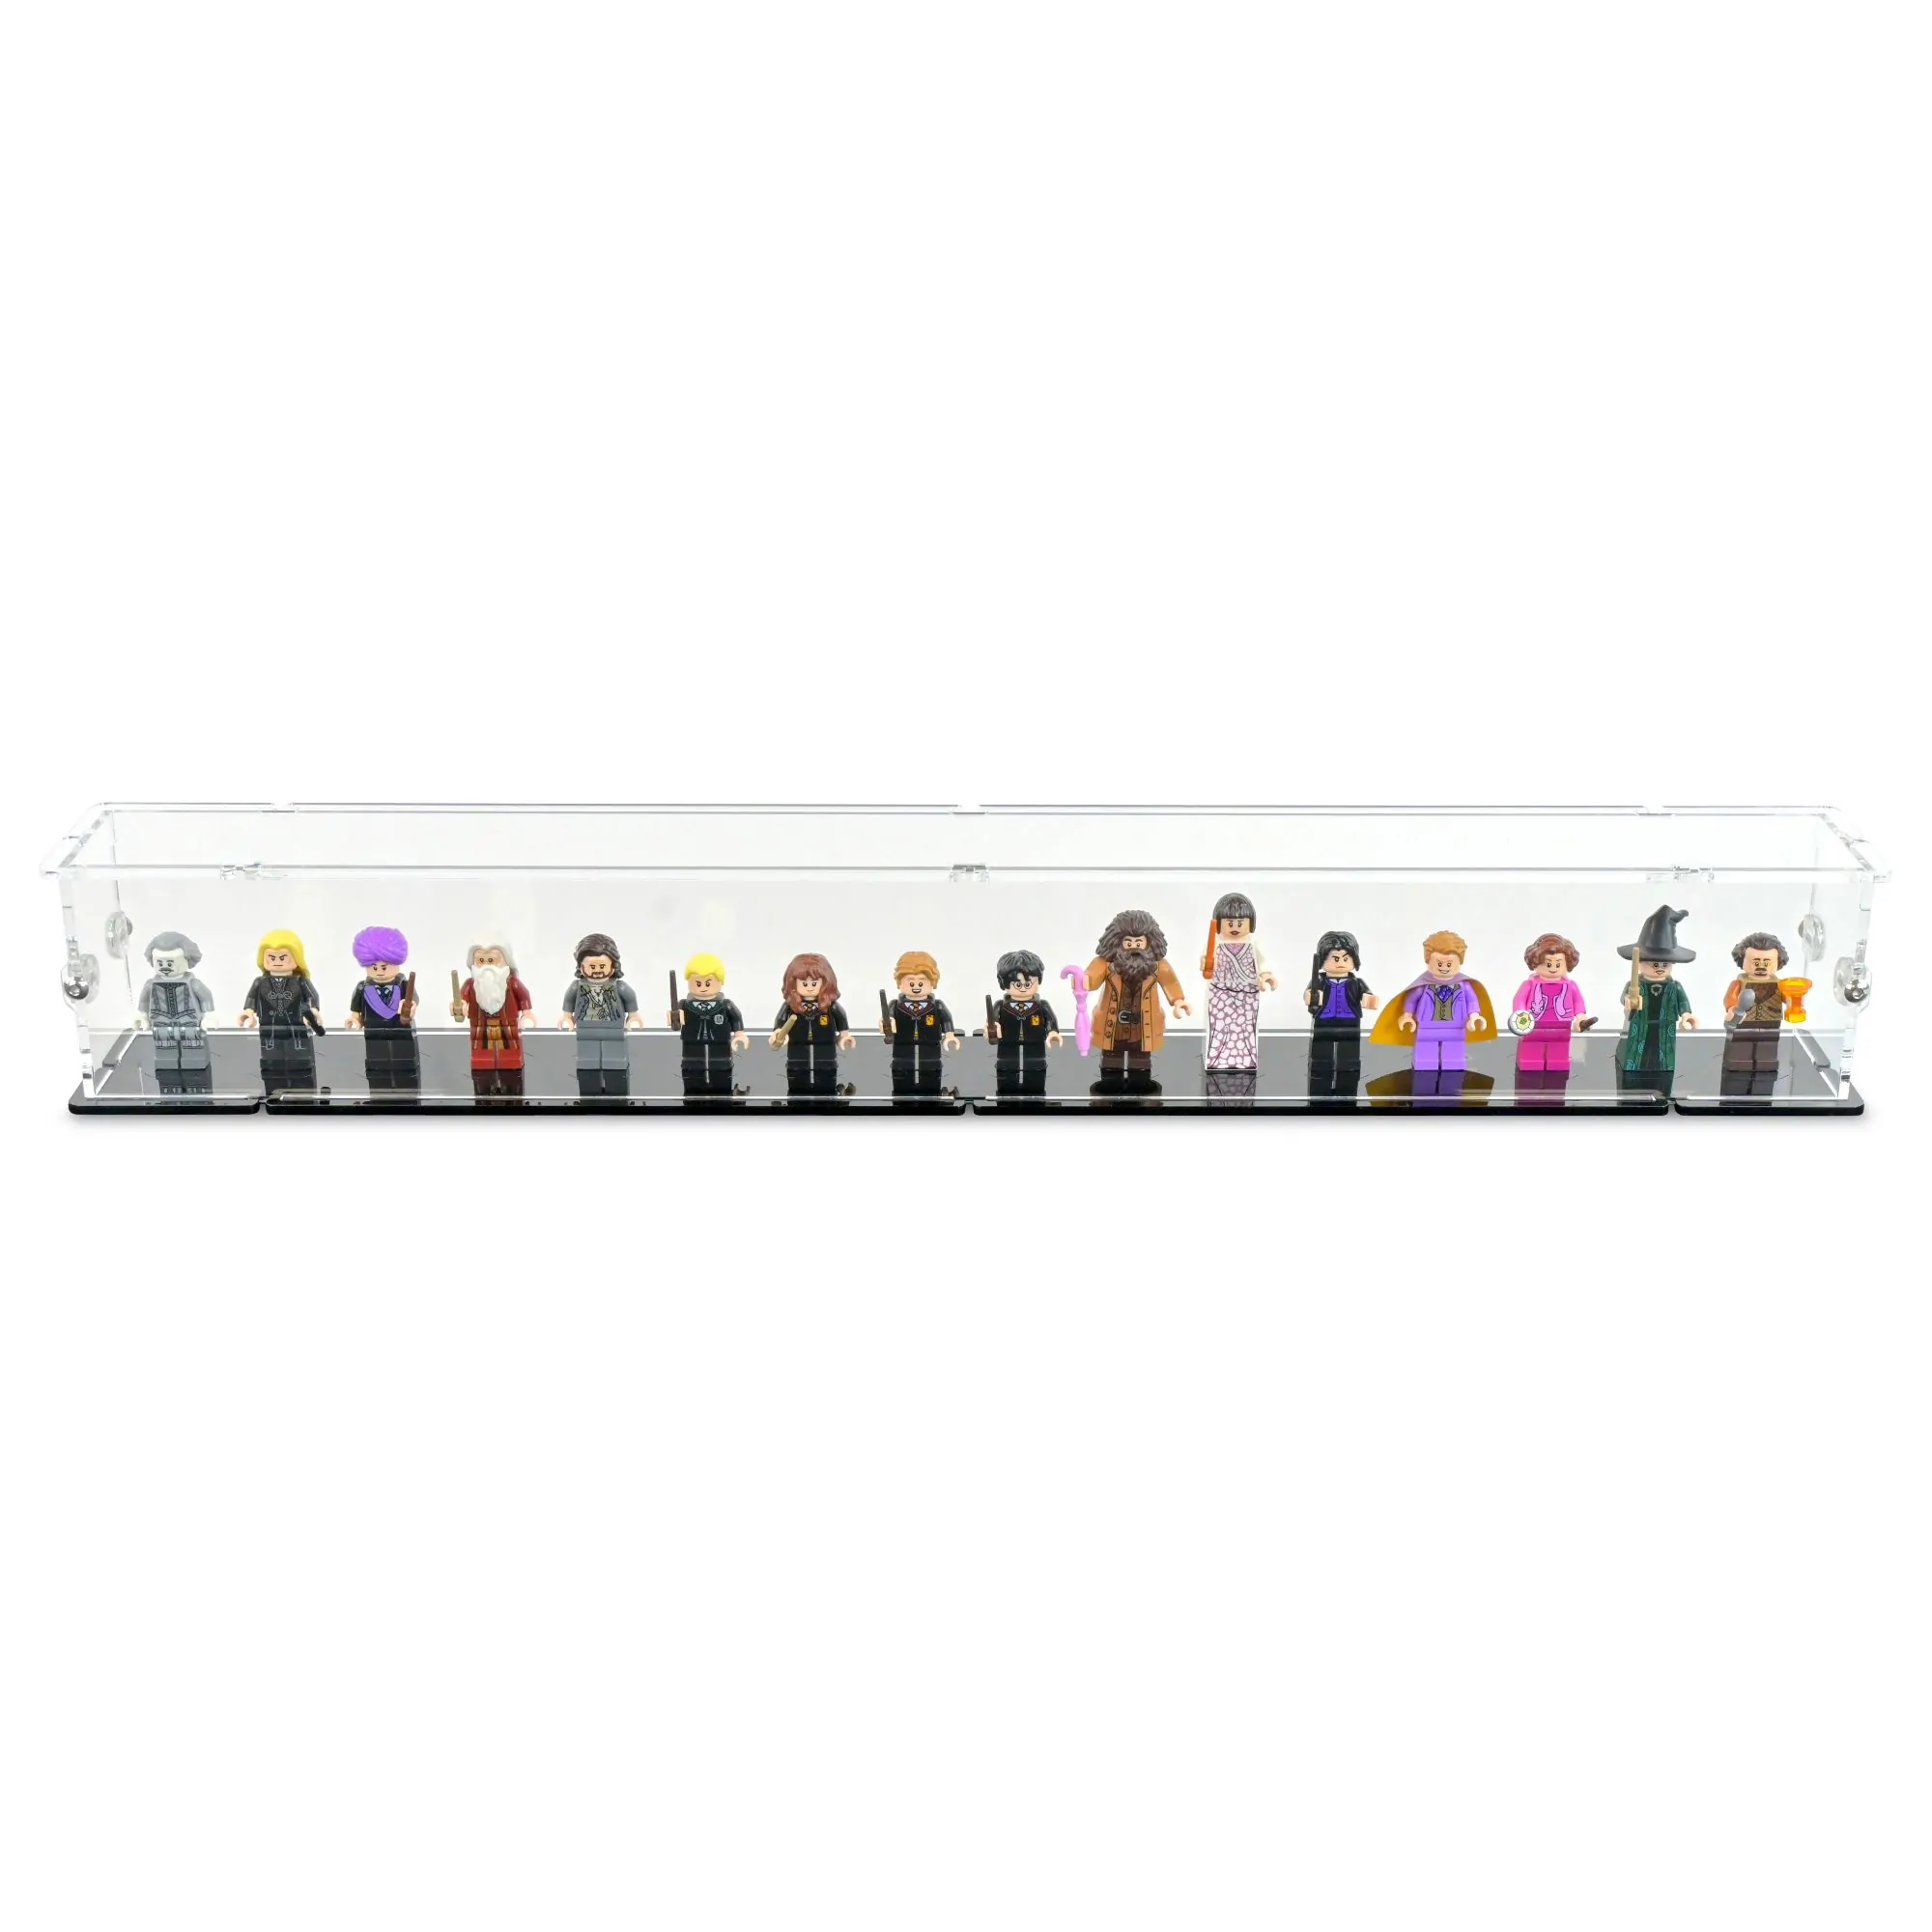 Minifigure Display Case 16 5006598, UNKNOWN